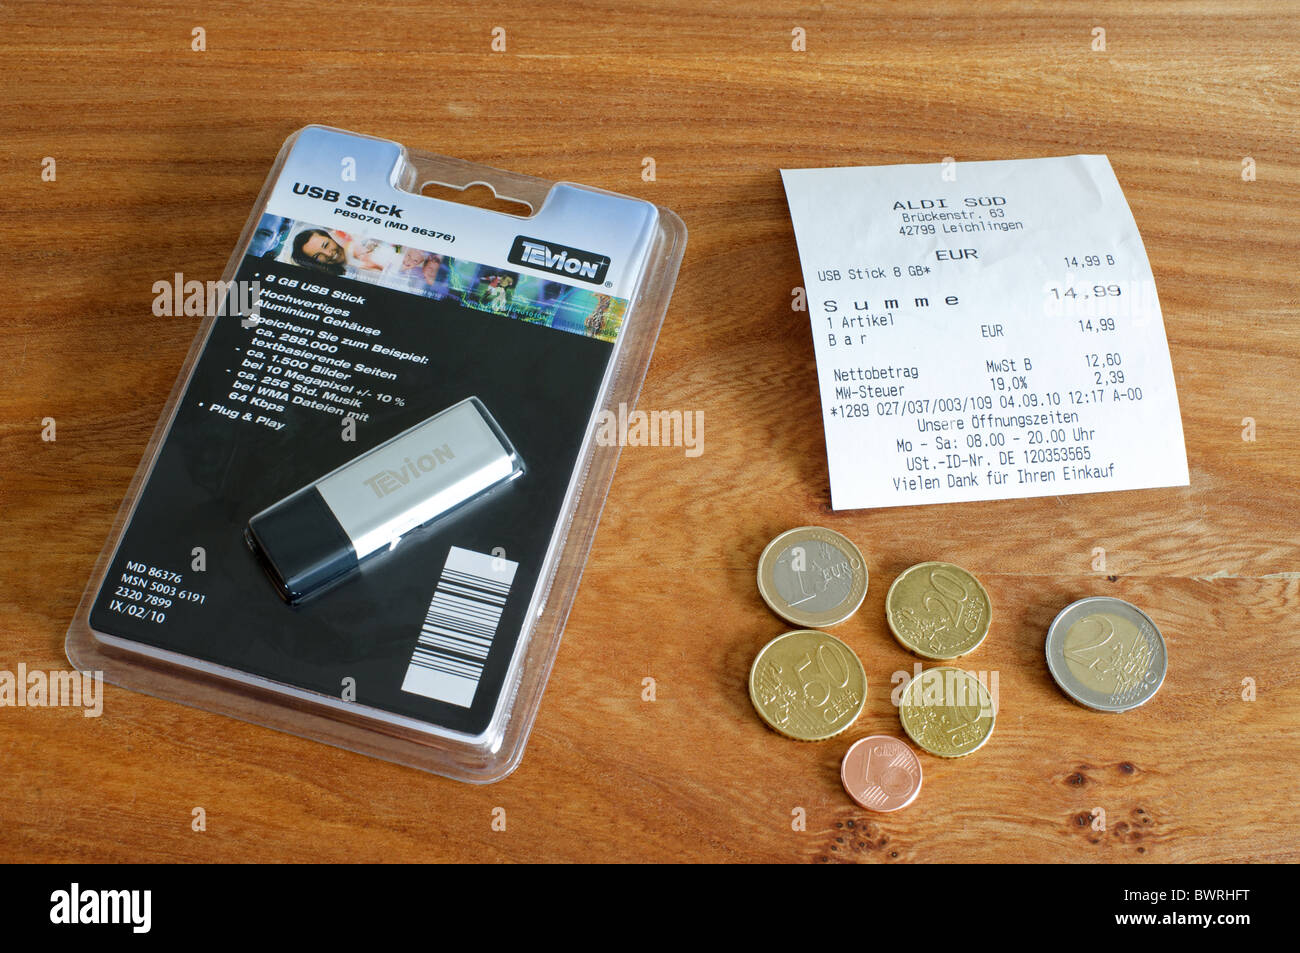 Tevion USB stick brought from Aldi supermarket in Germany Stock Photo -  Alamy